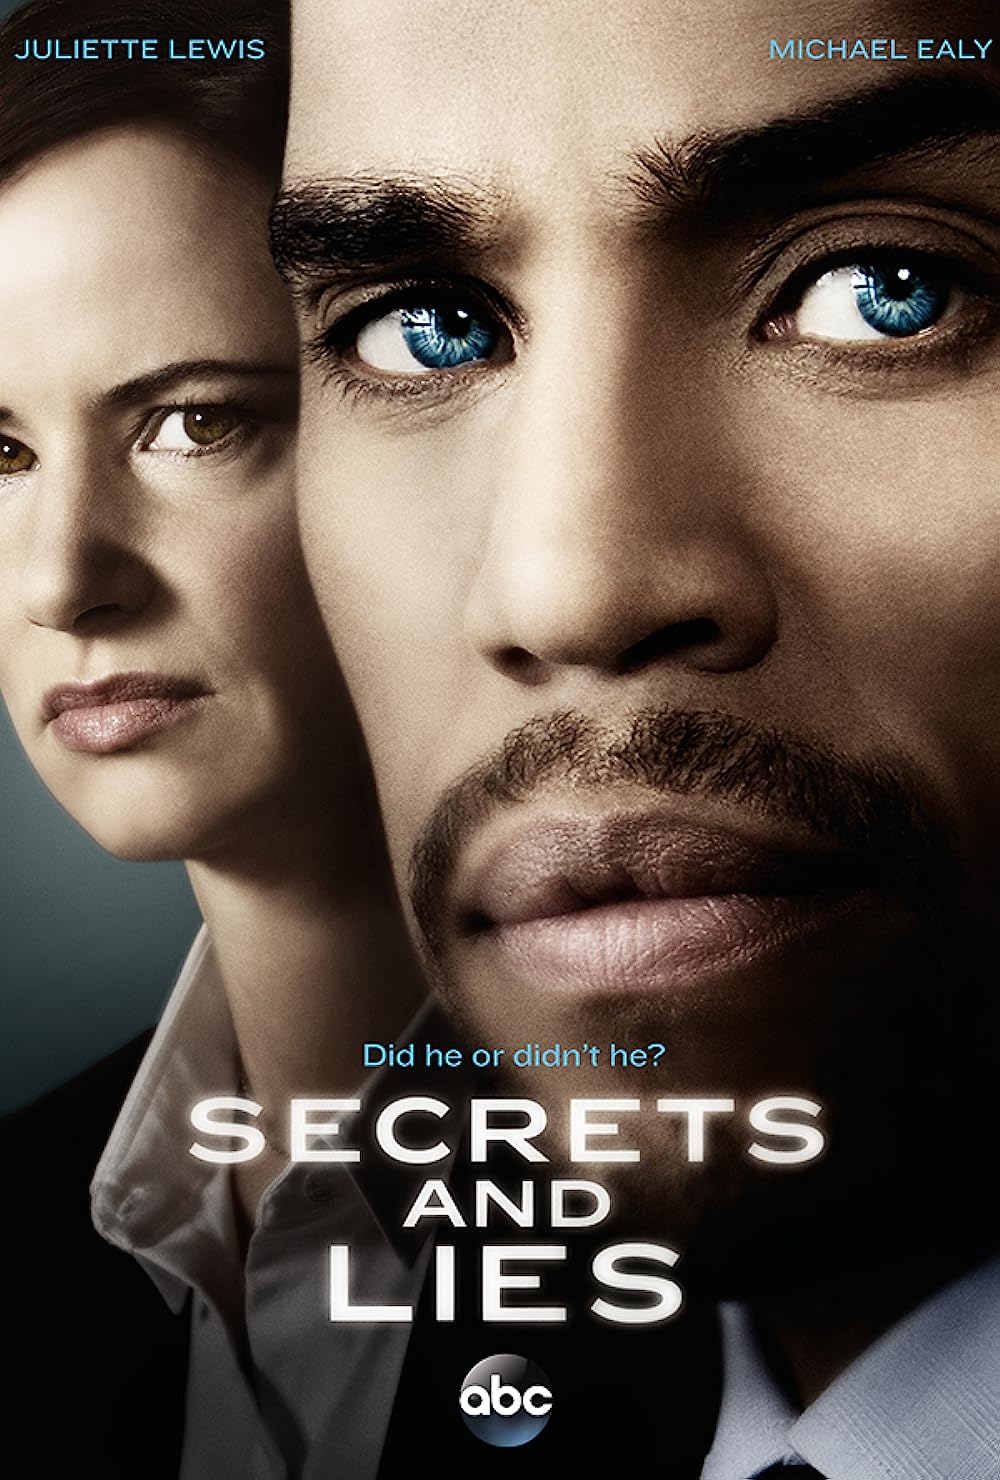 Secrets and Lies poster